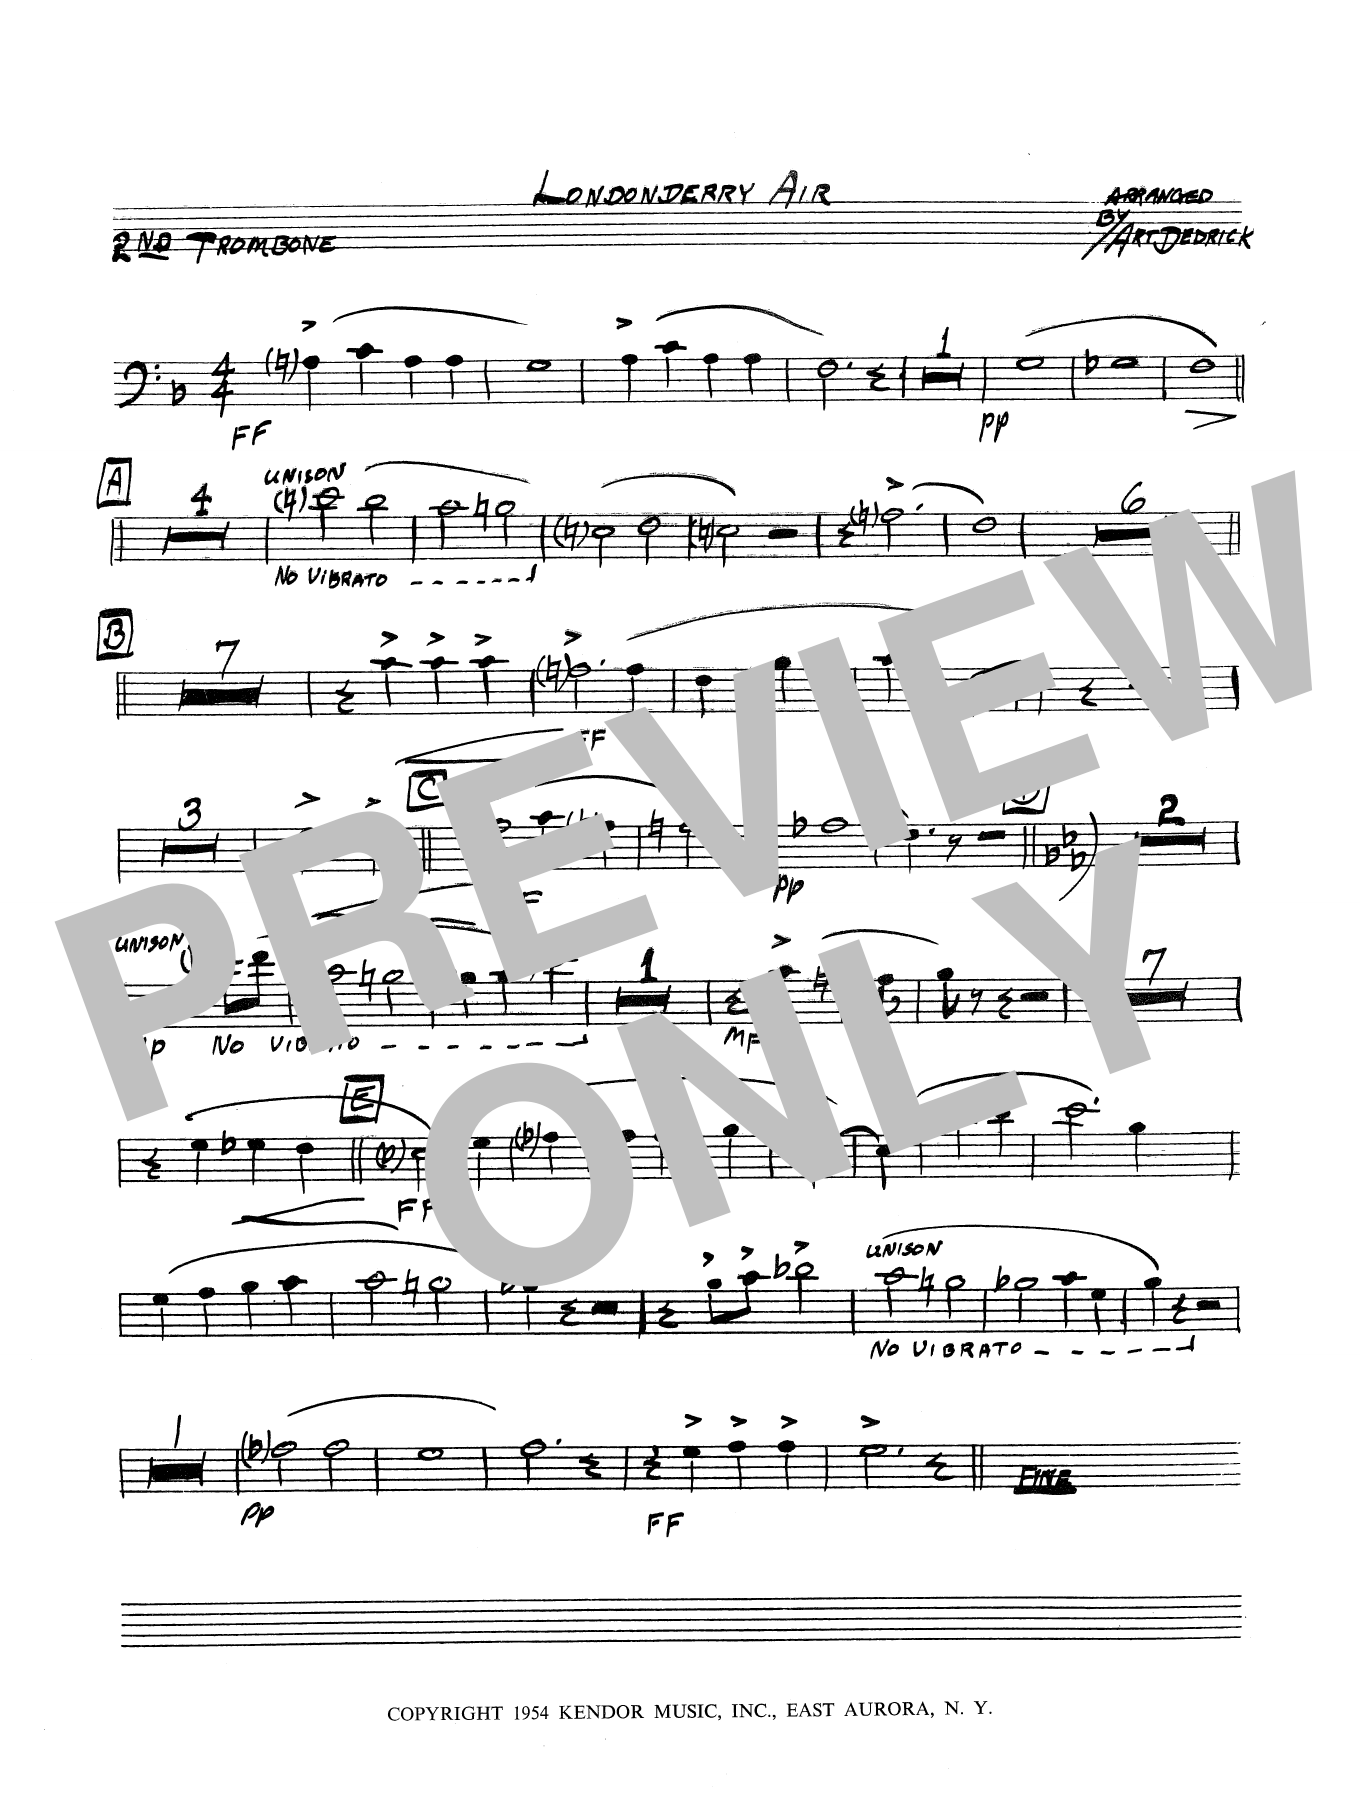 Art Dedrick Londonderry Air - 2nd Trombone sheet music preview music notes and score for Jazz Ensemble including 1 page(s)